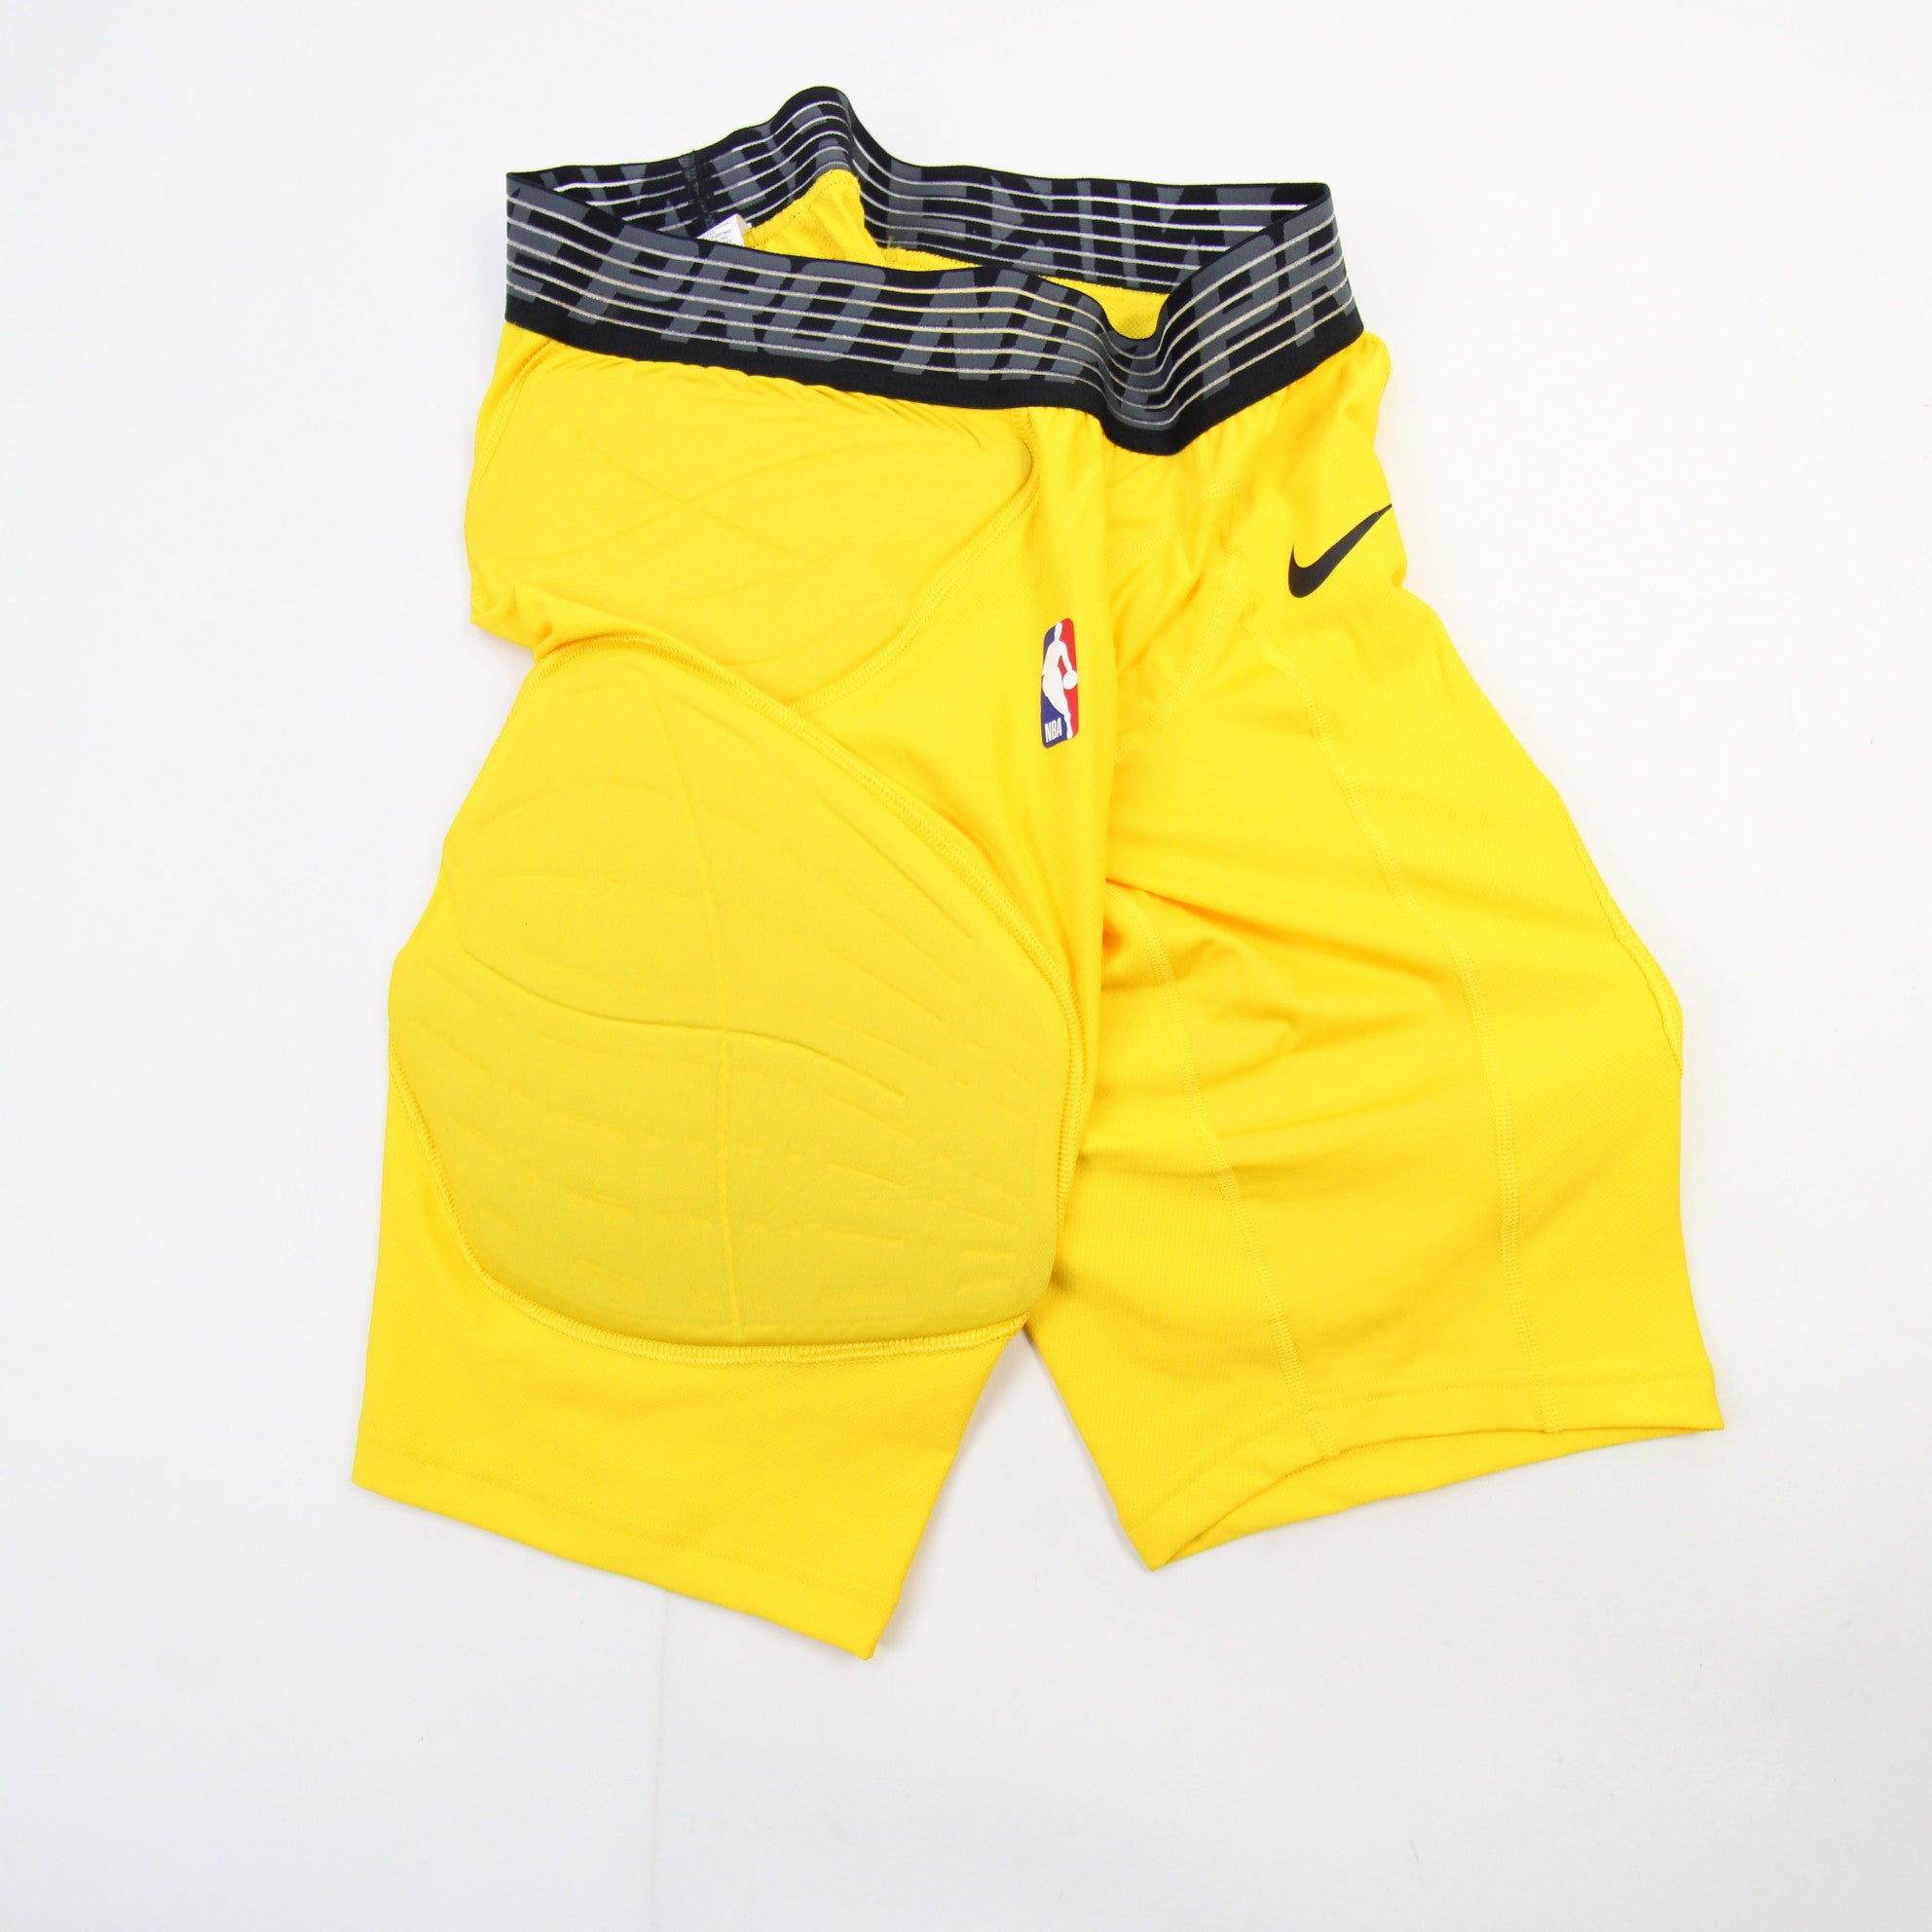 Nike Pro Hyperstrong Padded Compression Shorts Men's Yellow New with Tags  2XL